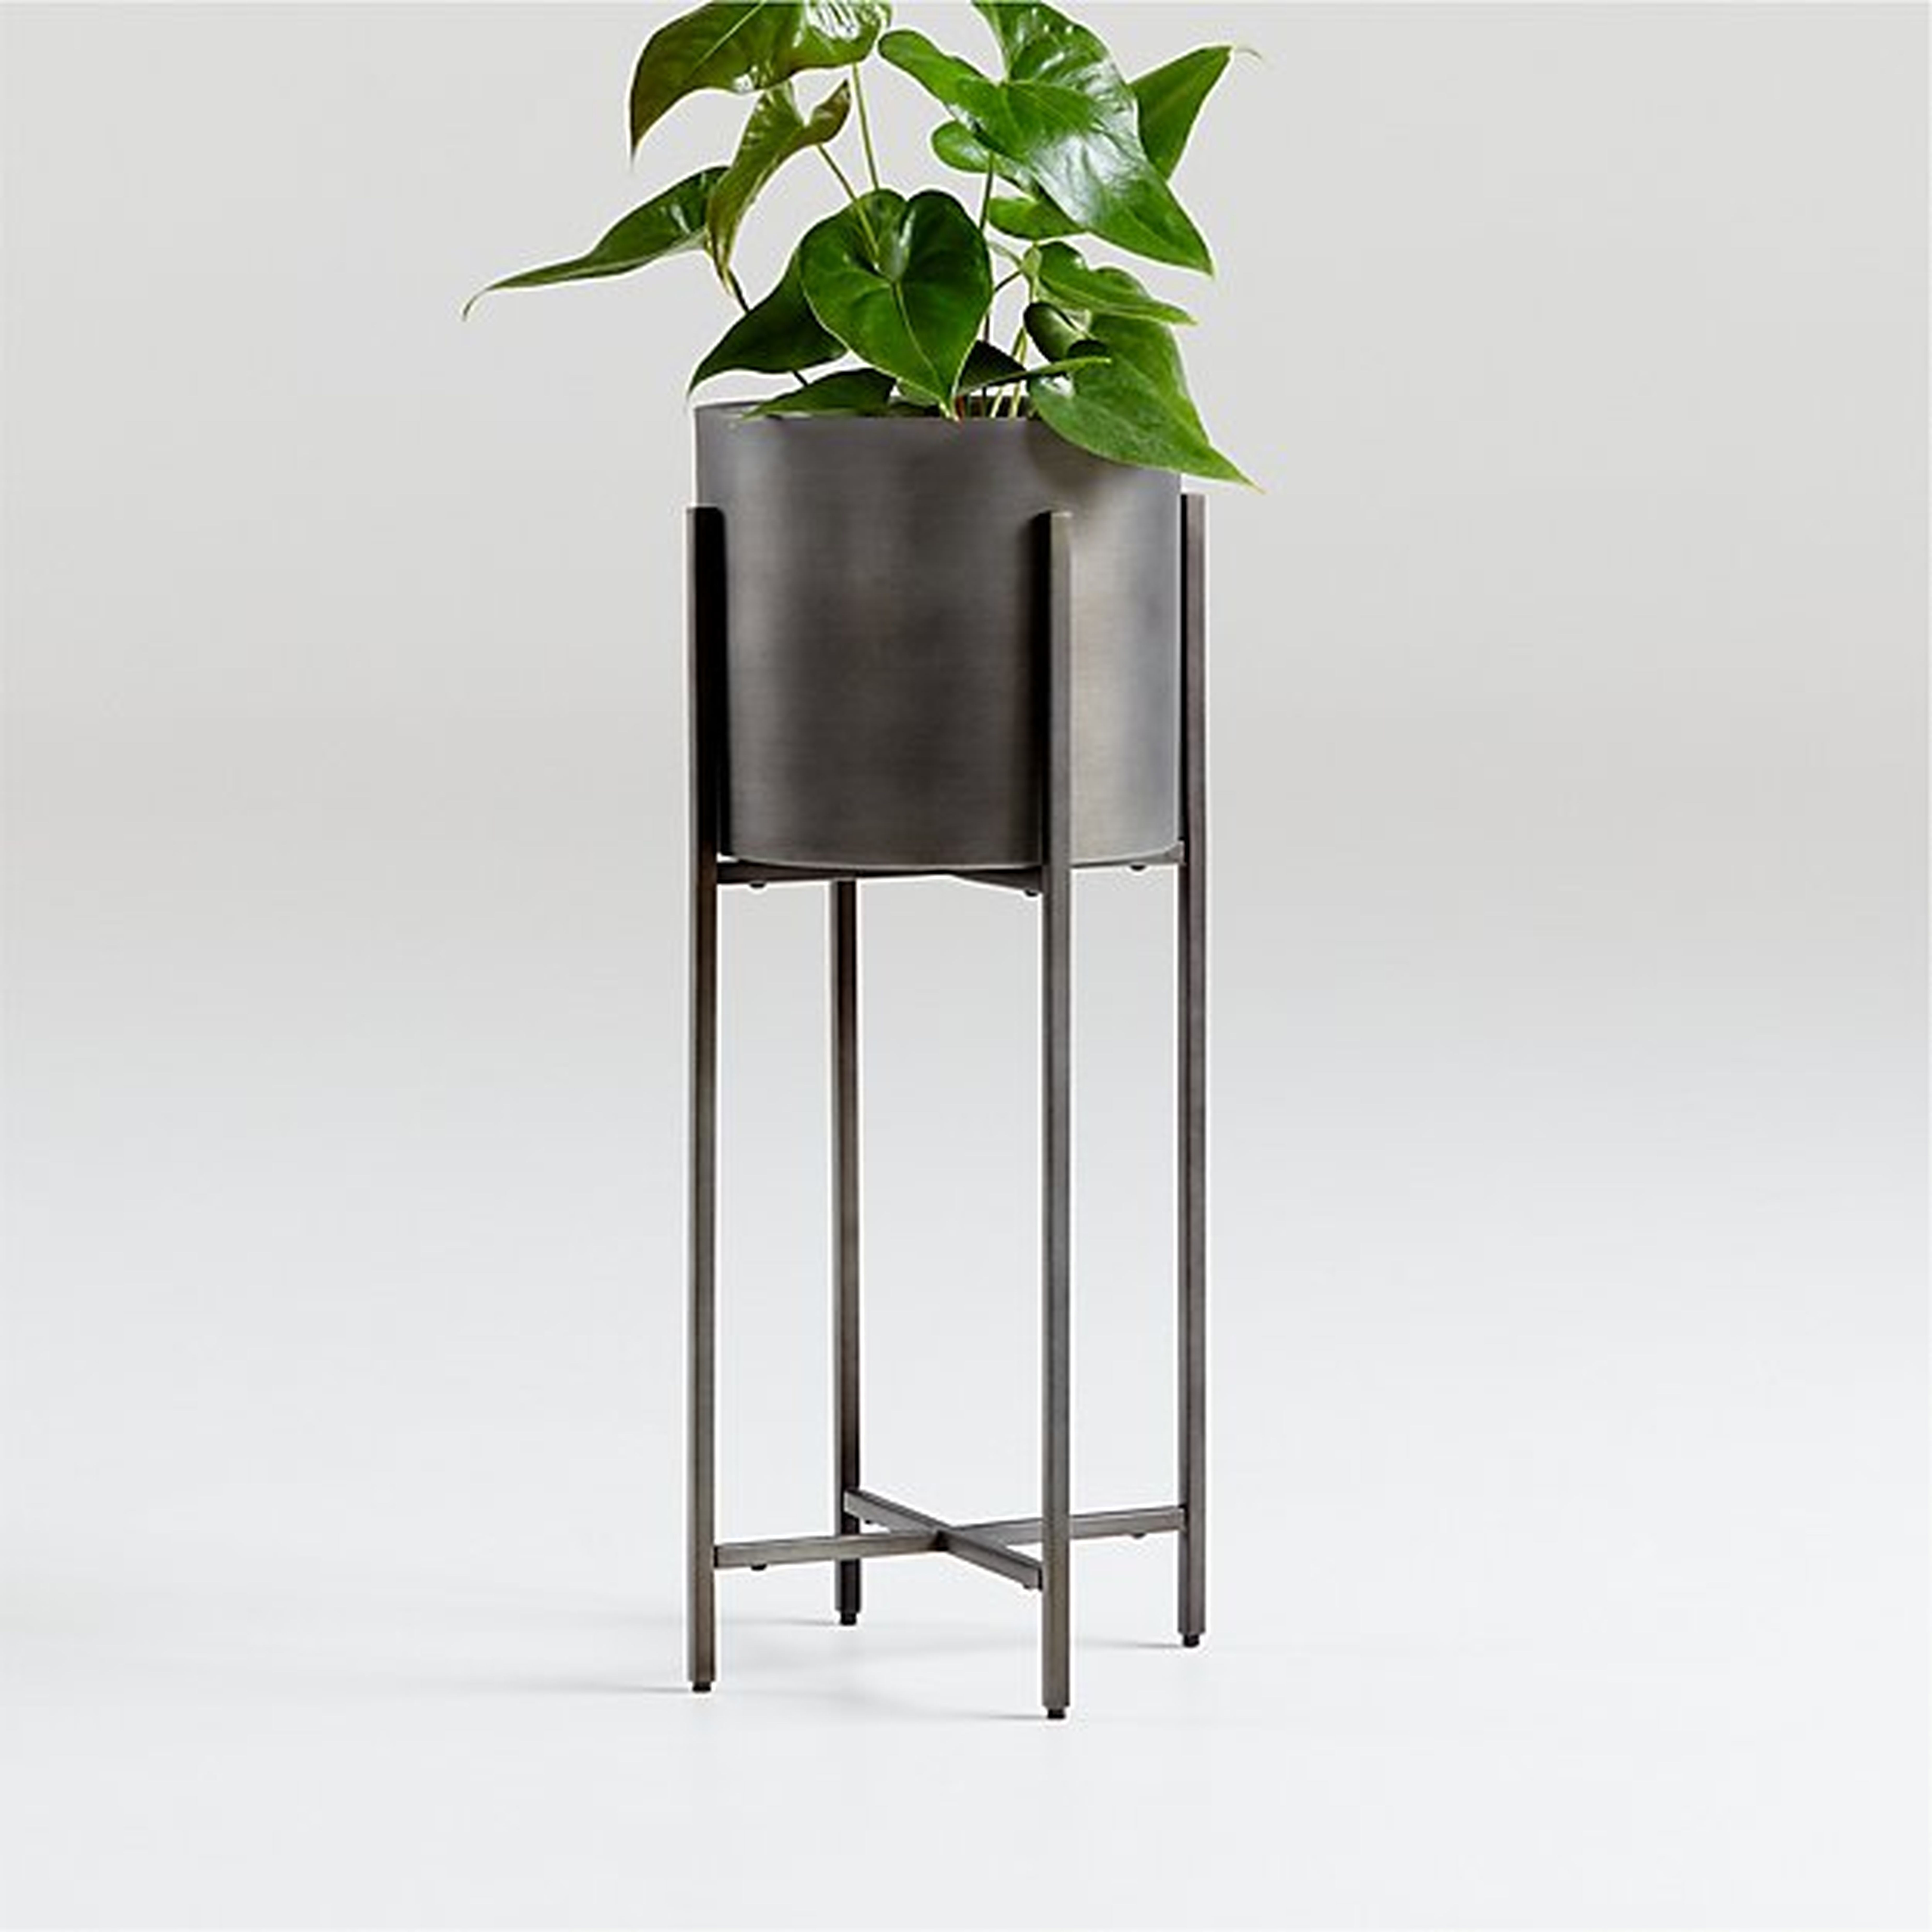 Dundee Bronze Floor Planter with Short Stand - Crate and Barrel